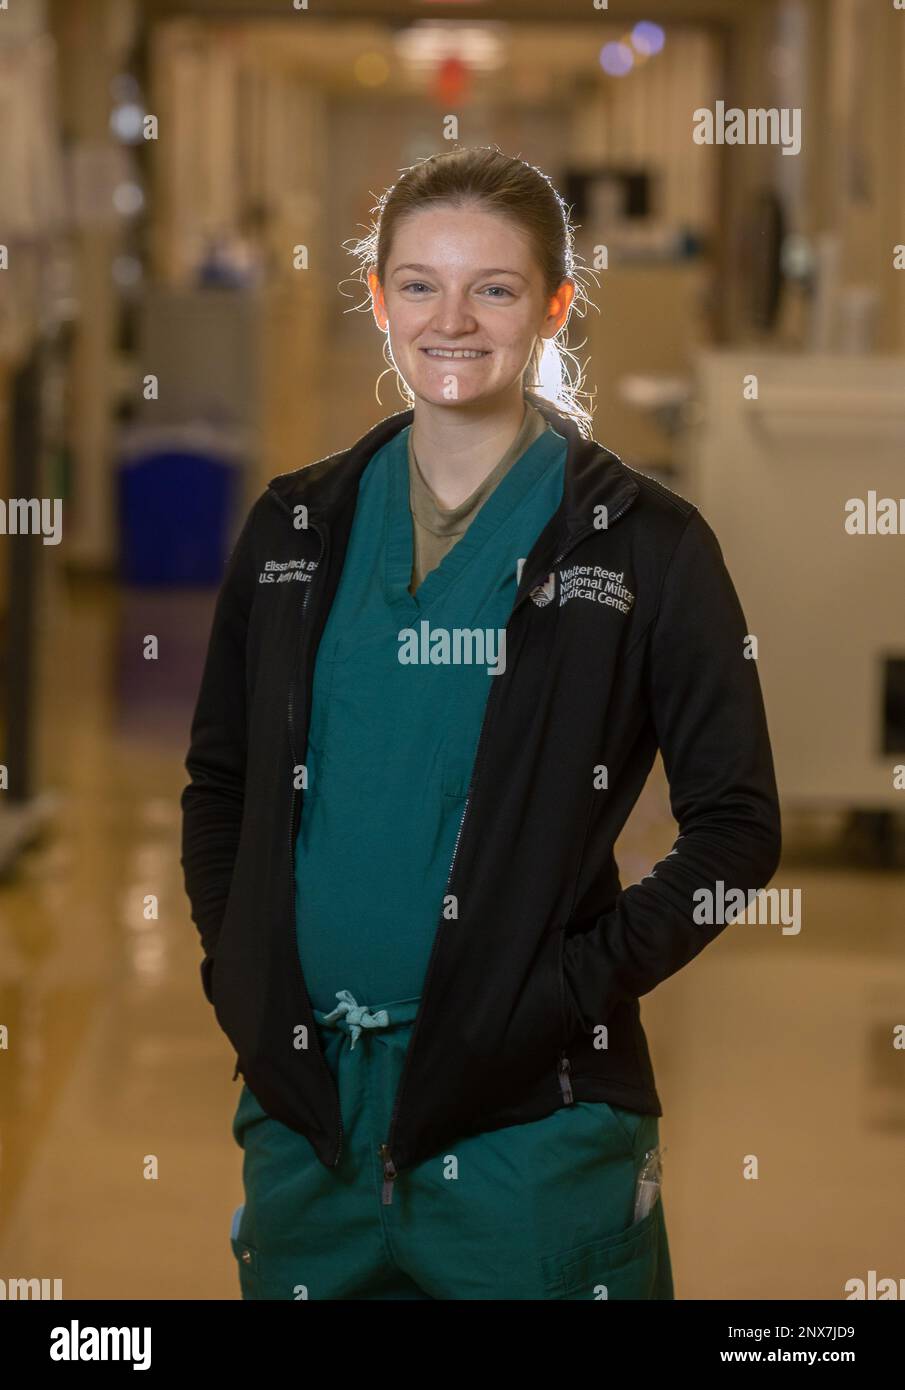 U.S. Army 2nd Lt. Elissa Mack a pediatric nurse from Valparaiso, Indiana, assigned to Walter Reed National Military Medical Center (WRNMMC) poses for a photo at WRNMMC Bethesda, Maryland, Jan 12, 2023. (DOD photo by Ricardo J. Reyes) Stock Photo